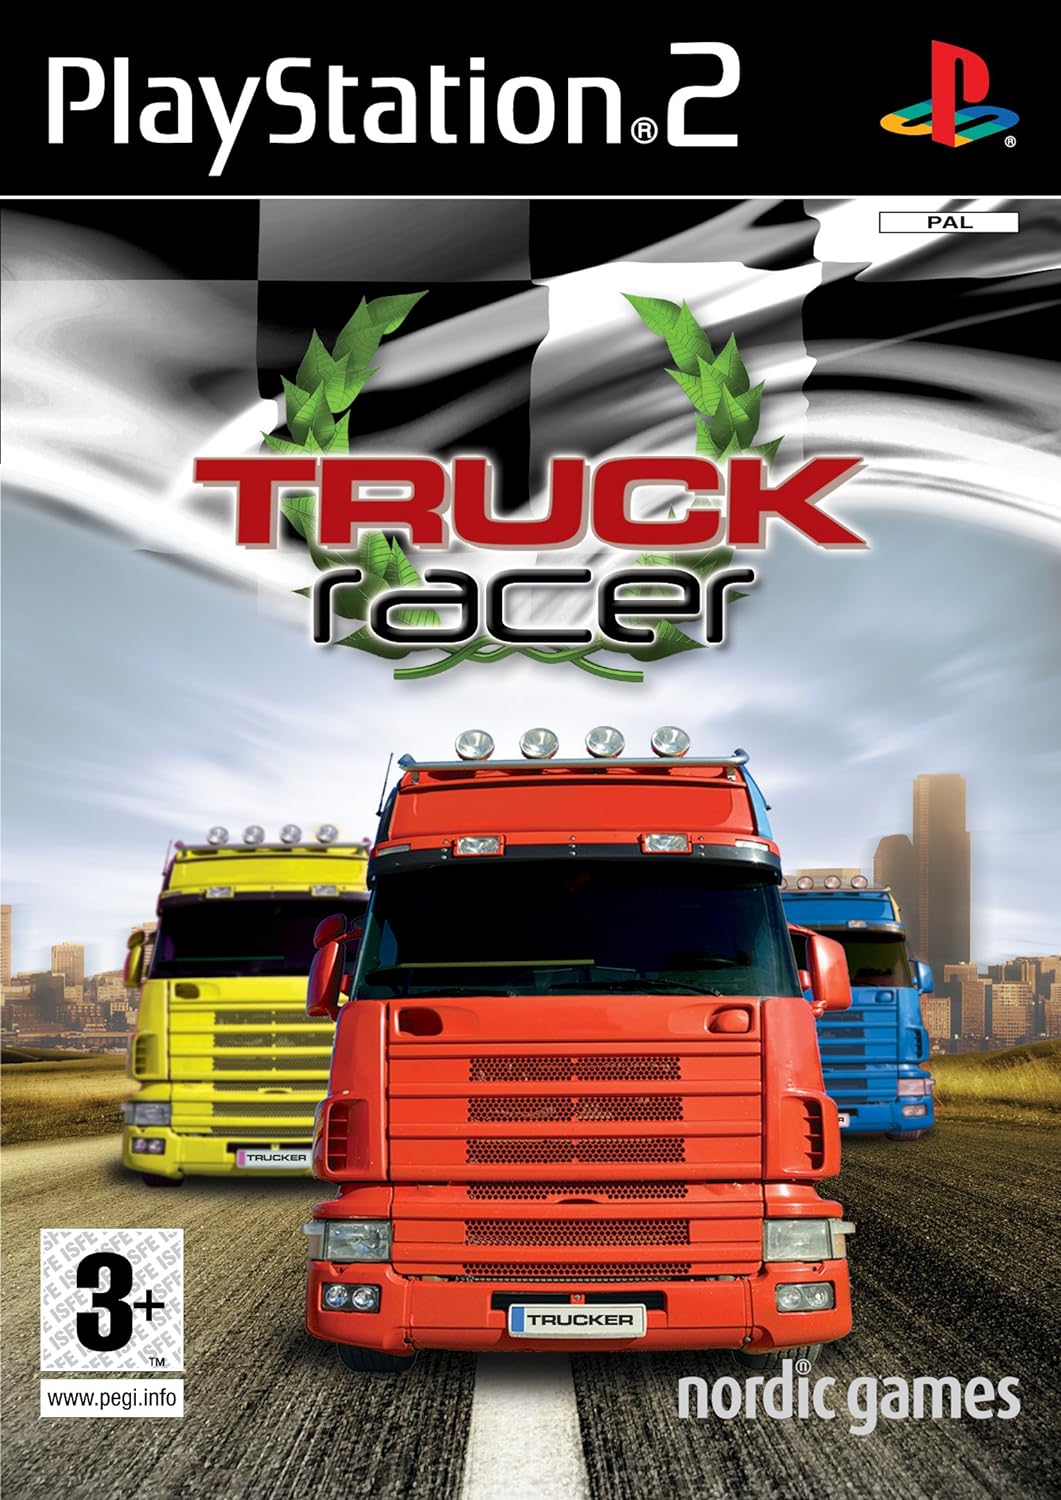 Truck Racer - Playstation 2 (USED)